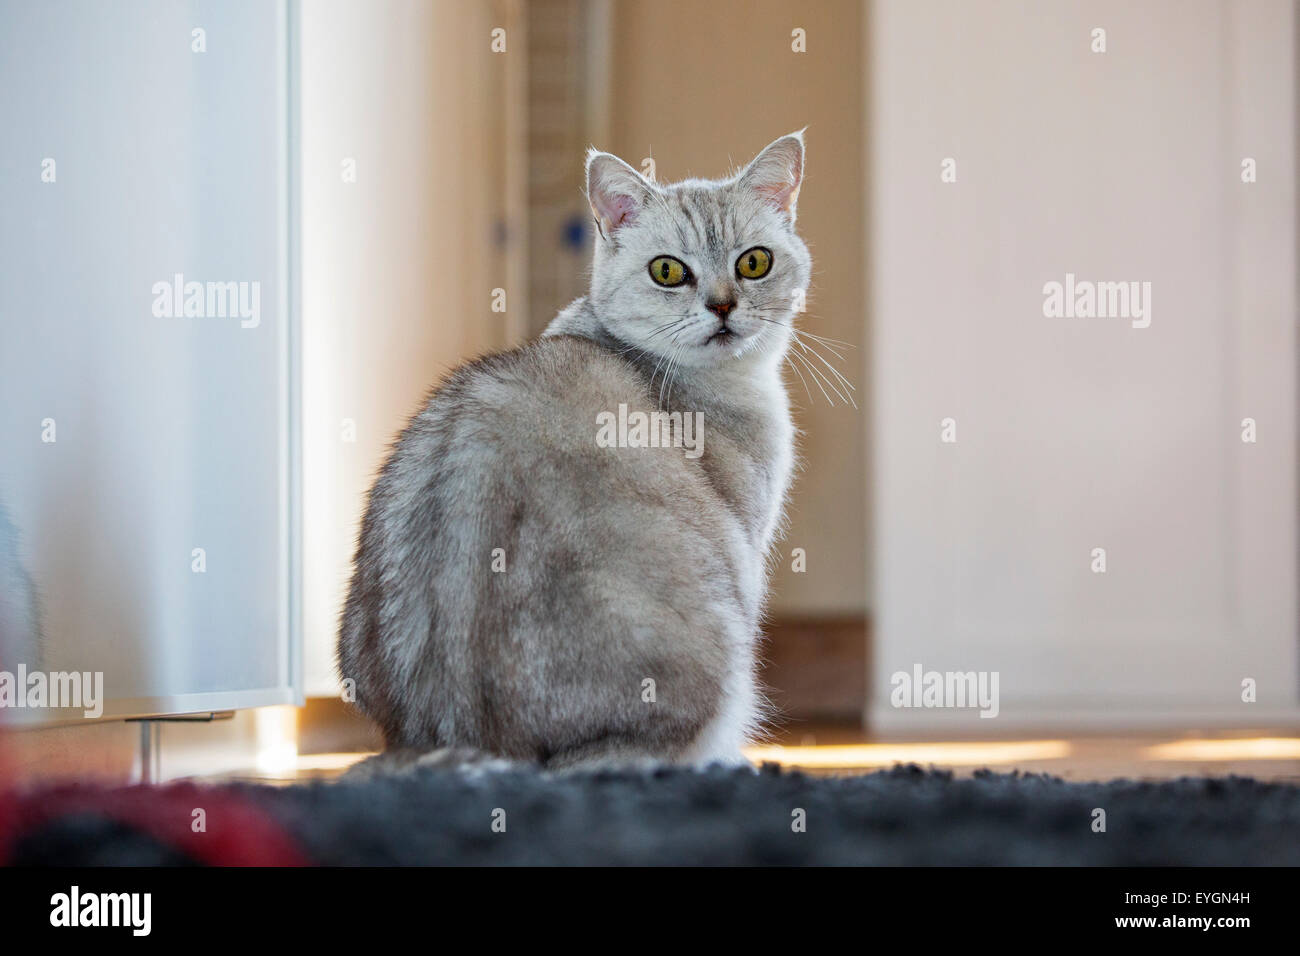 British shorthair cat sitting on the floor at home Stock Photo